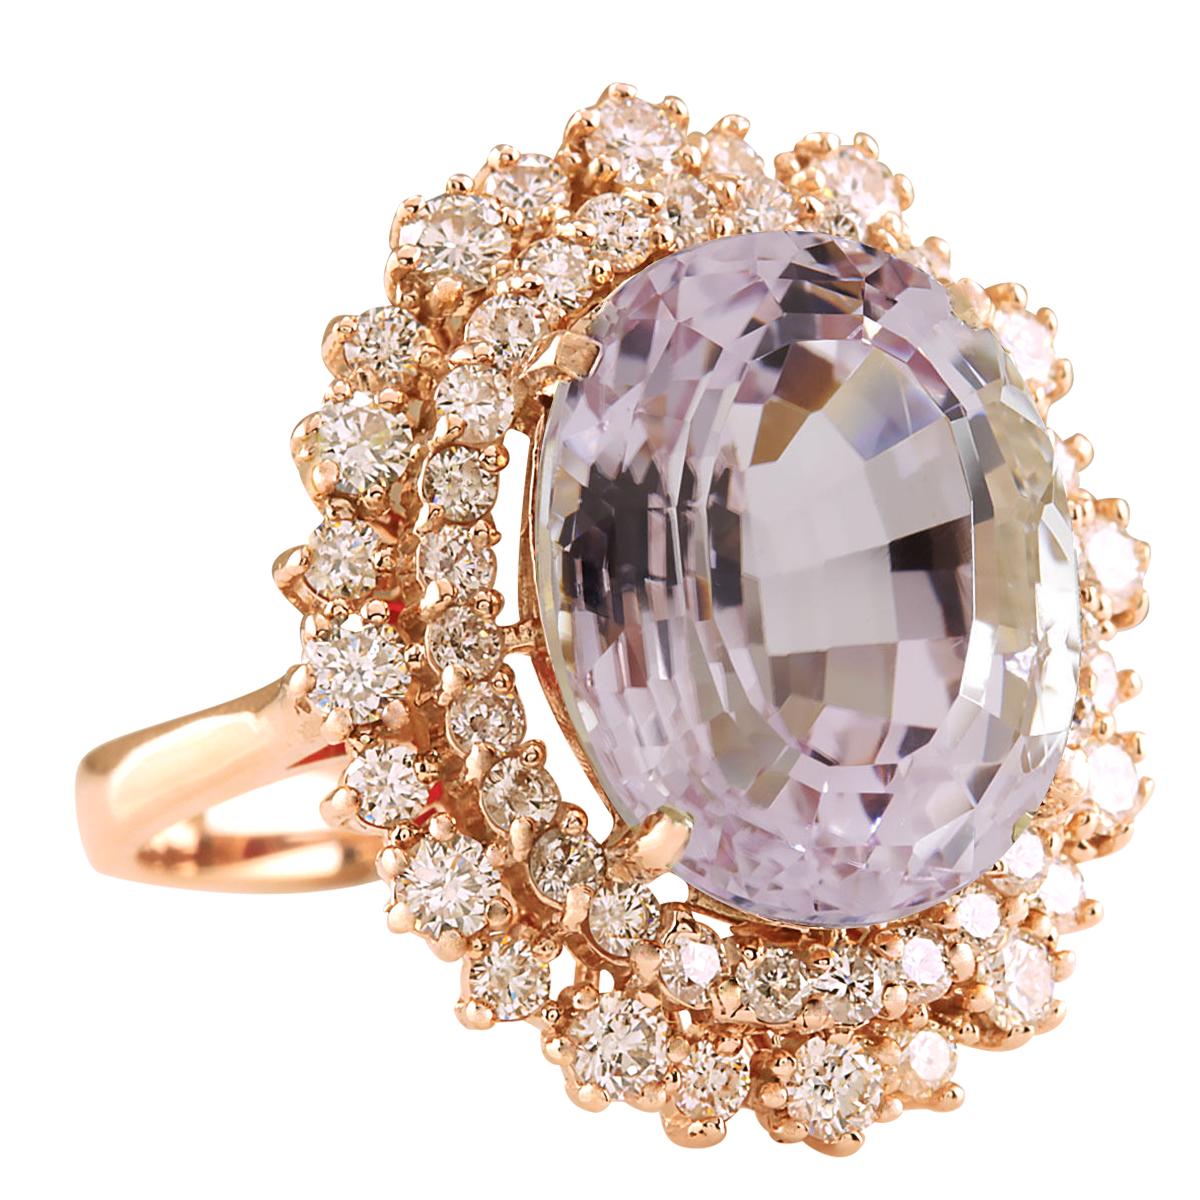 Presenting our exquisite 14K Yellow Gold Diamond Ring featuring a captivating 18.07 Carat Kunzite centerpiece. Crafted meticulously, this ring weighs 10.8 grams and showcases a magnificent 15.87 Carat Kunzite (16.00x12.00 mm) complemented by 2.20